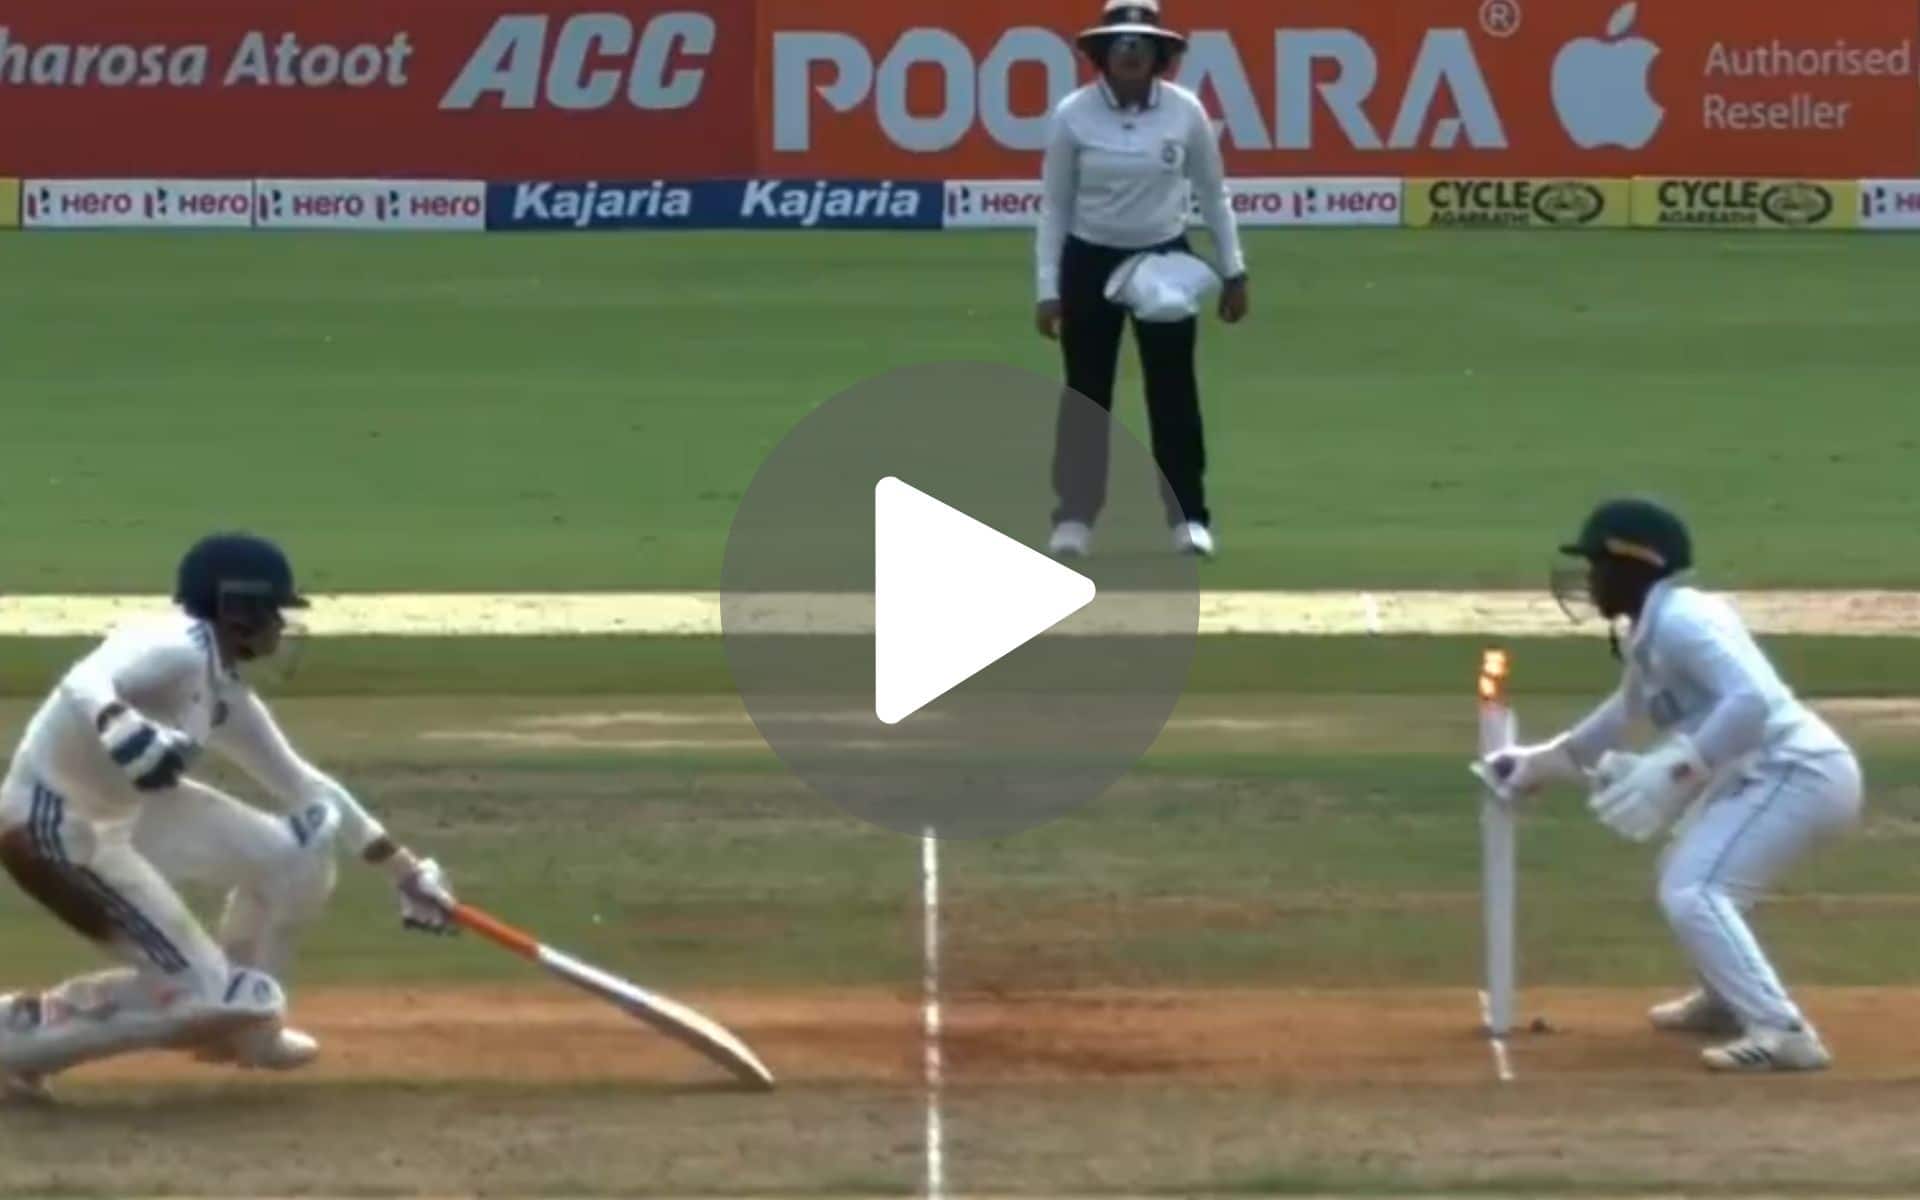 [Watch] Shafali Verma's Heroics Comes To A Tame End After Childish Blunder Leads To Run Out